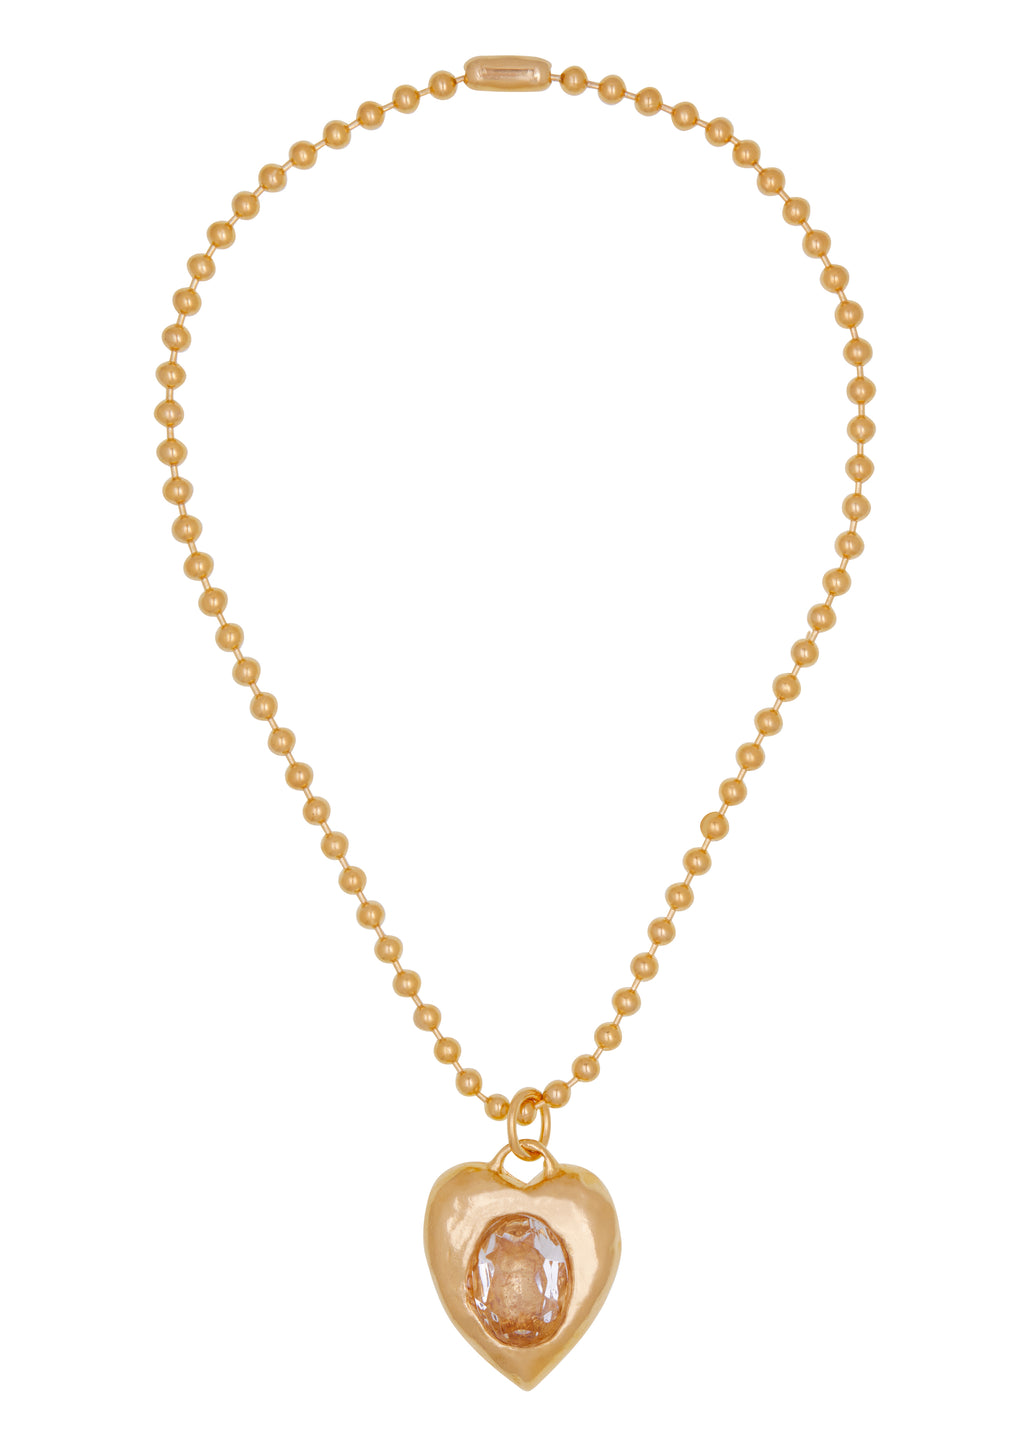 Pacha Necklace in Gold - Crystal